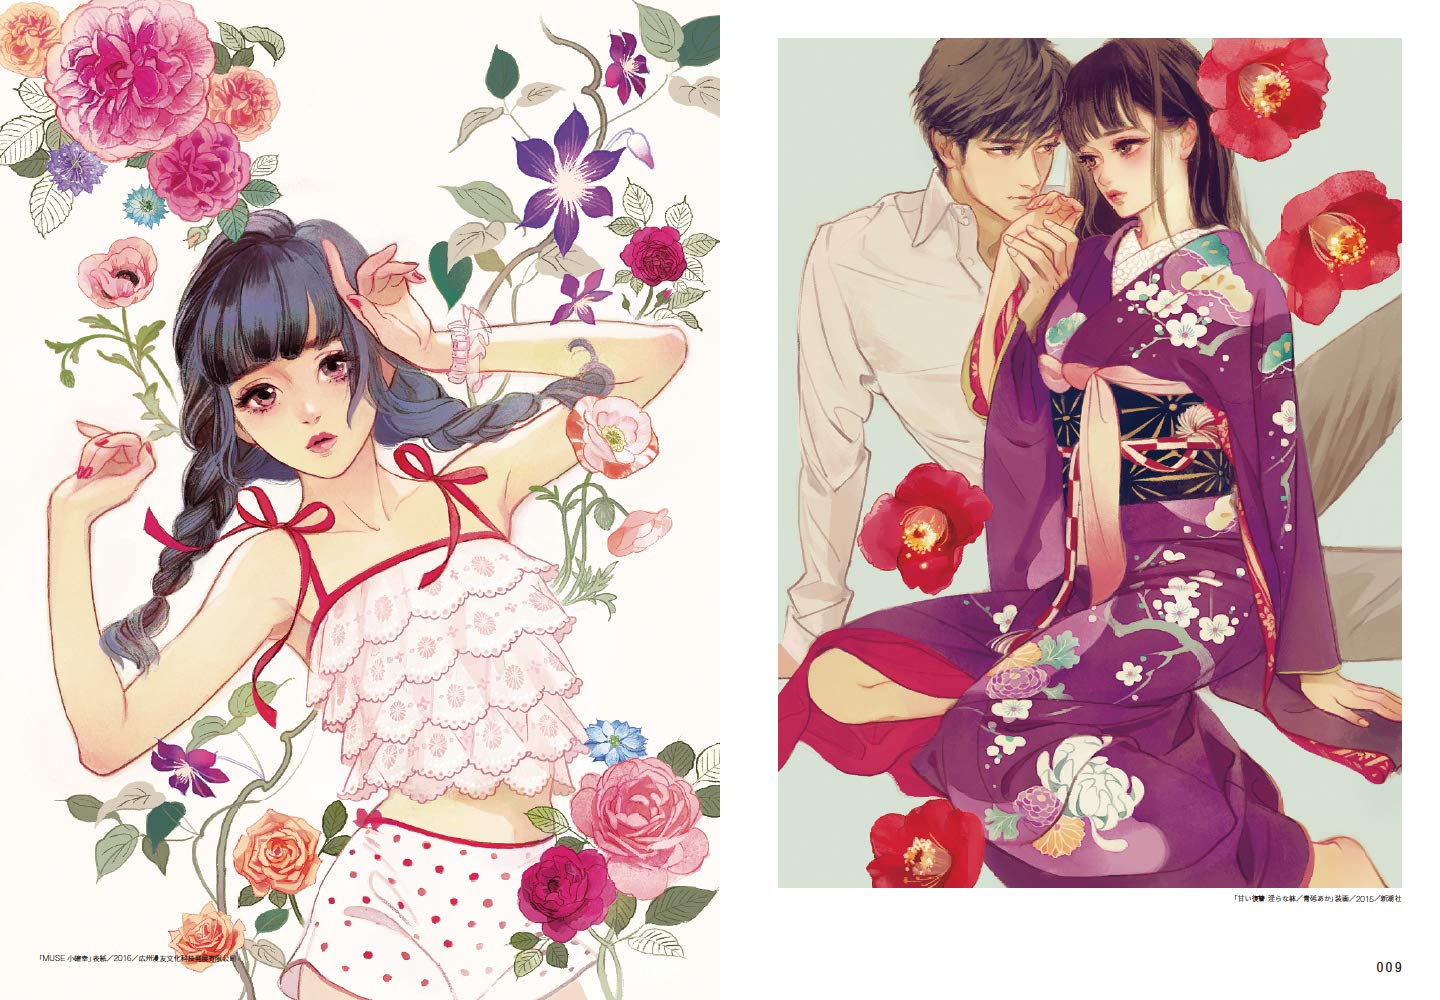 [FLASH SALE] Painting Dream Illustrations Book by Matsuo Hiromi